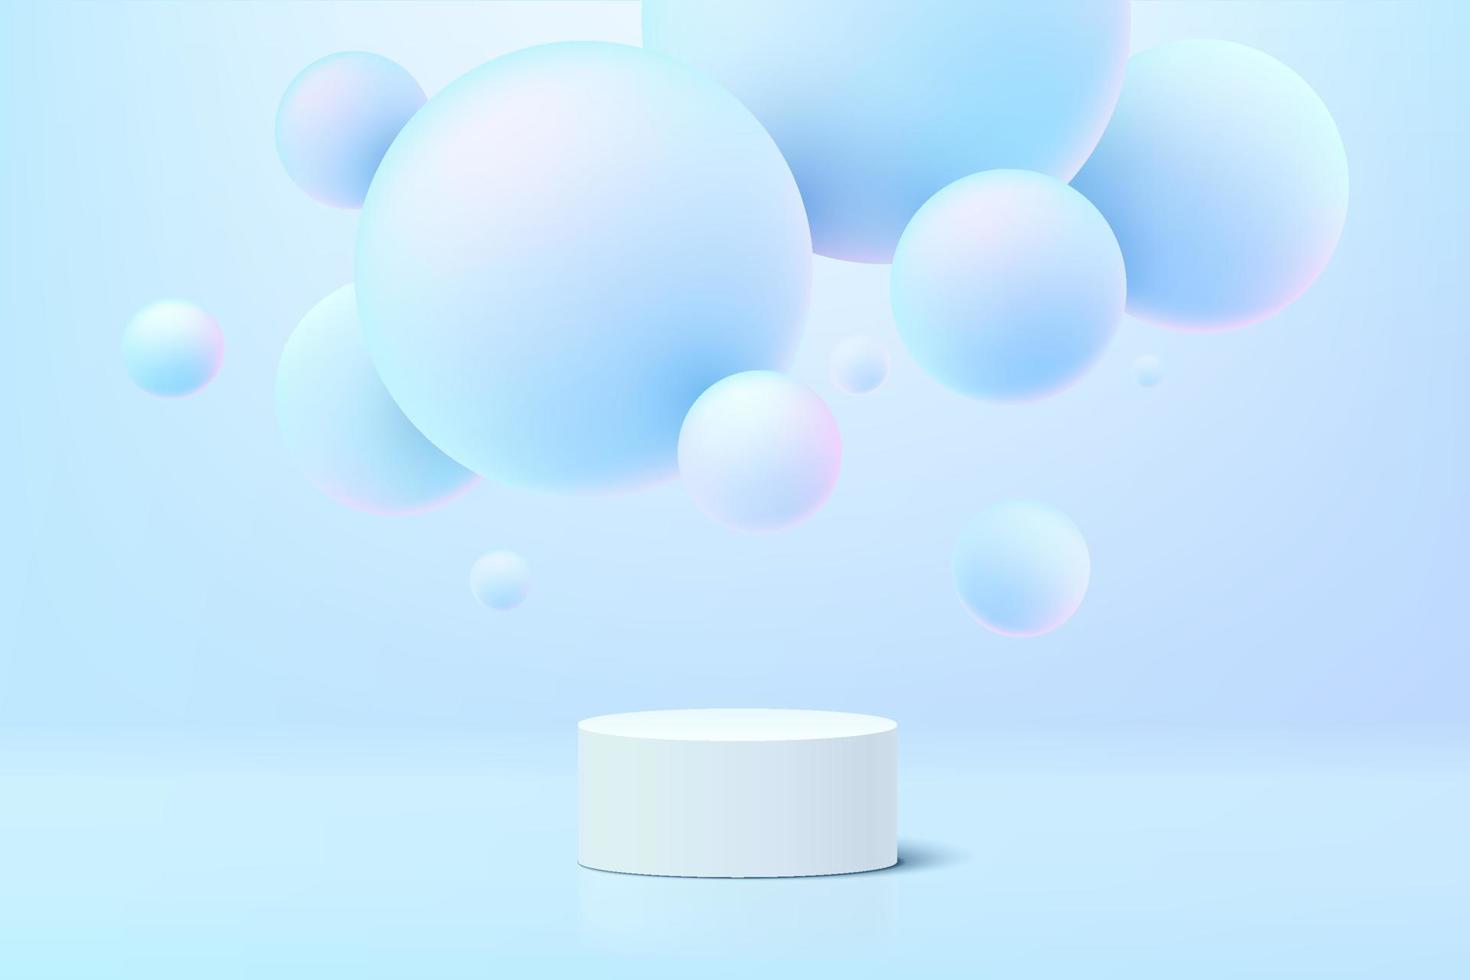 White cylinder pedestal podium with blue hologram sphere ball flying. Vector abstract studio room with 3D geometric platform. Pastel minimal scene for cosmetic products showcase, Promotion display.